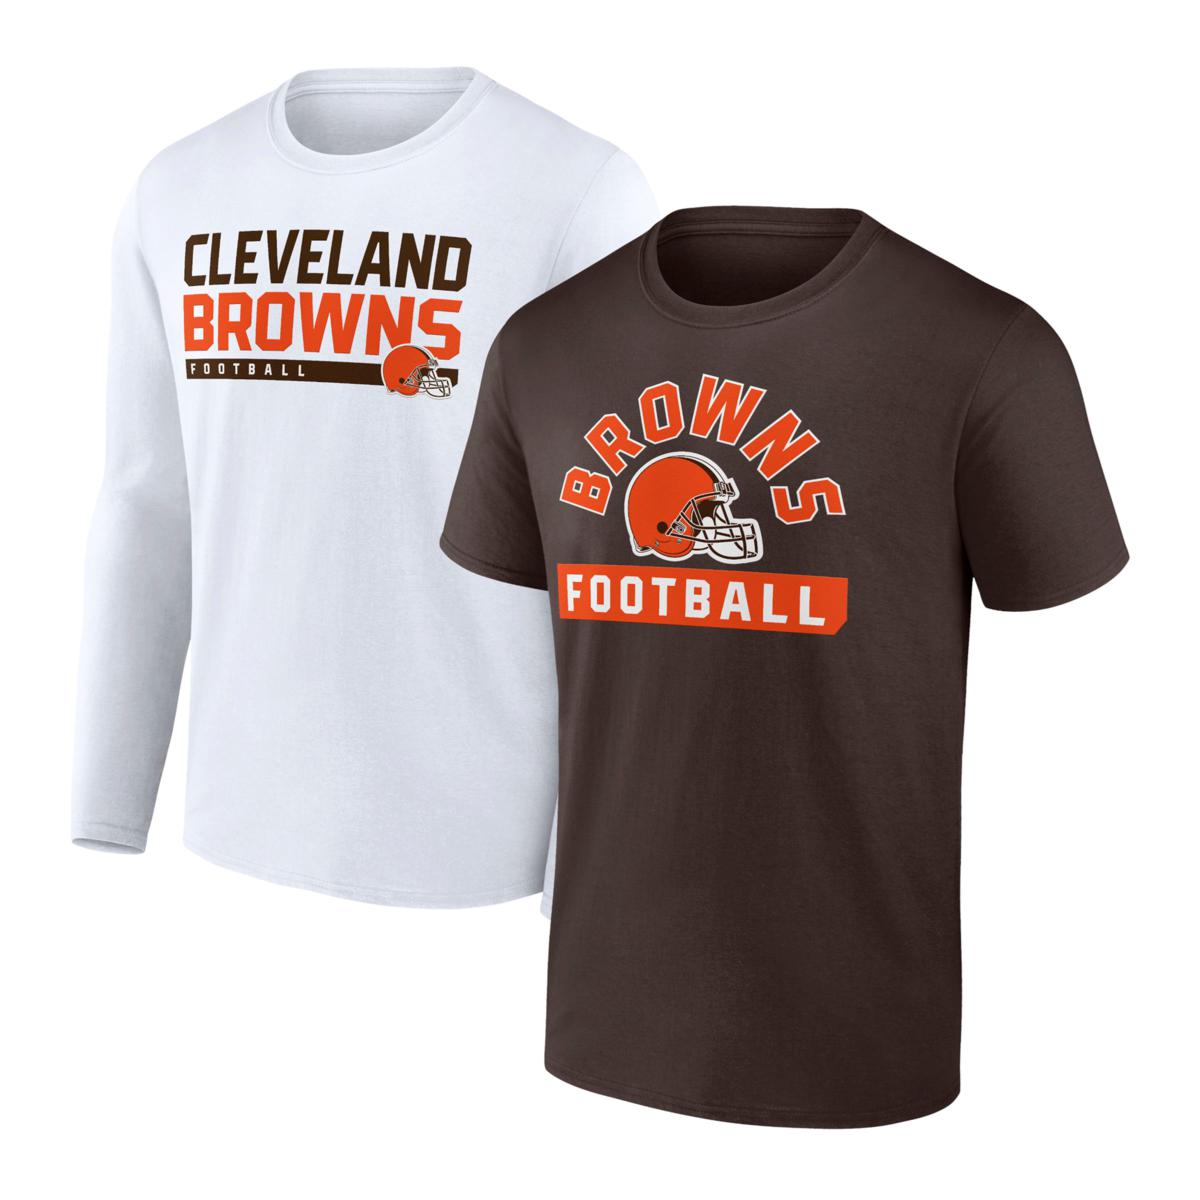 Officially Licensed NFL 3-in-1 Schedule T-Shirt Combo 2pk by Fanatics -  Browns